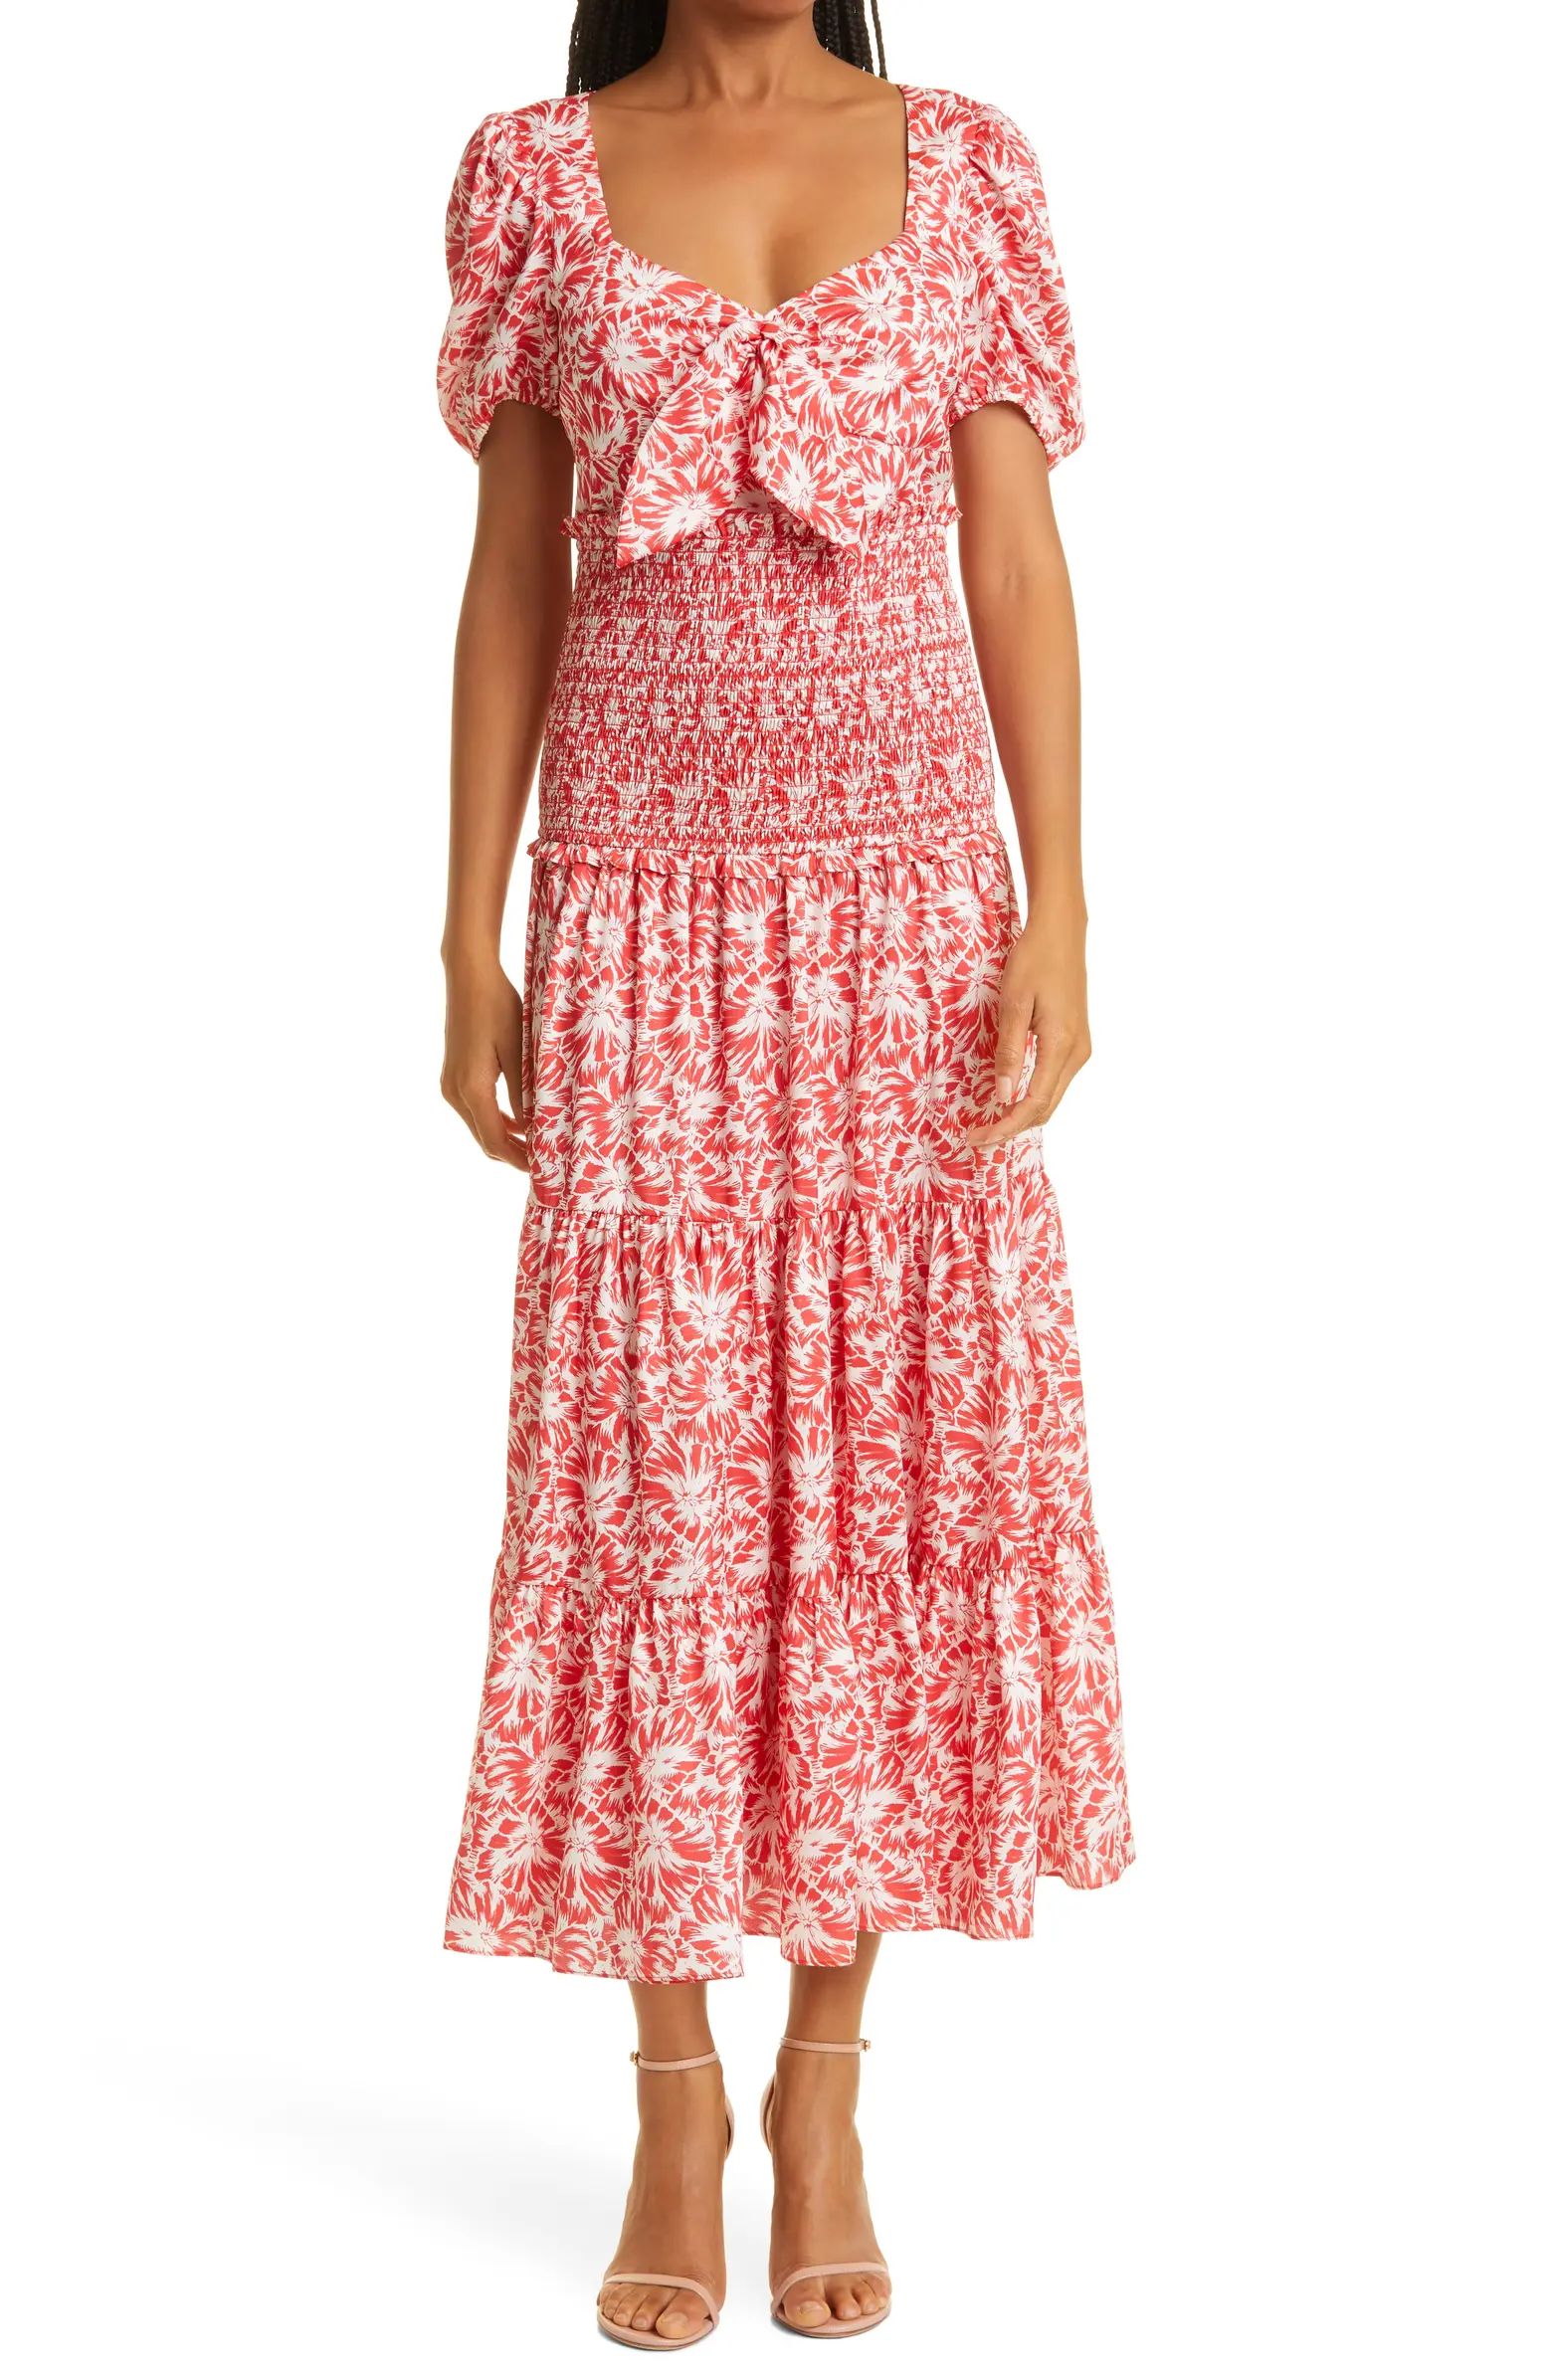 LIKELY Avra Floral Print Puff Sleeve Smocked Dress | Nordstrom | Nordstrom